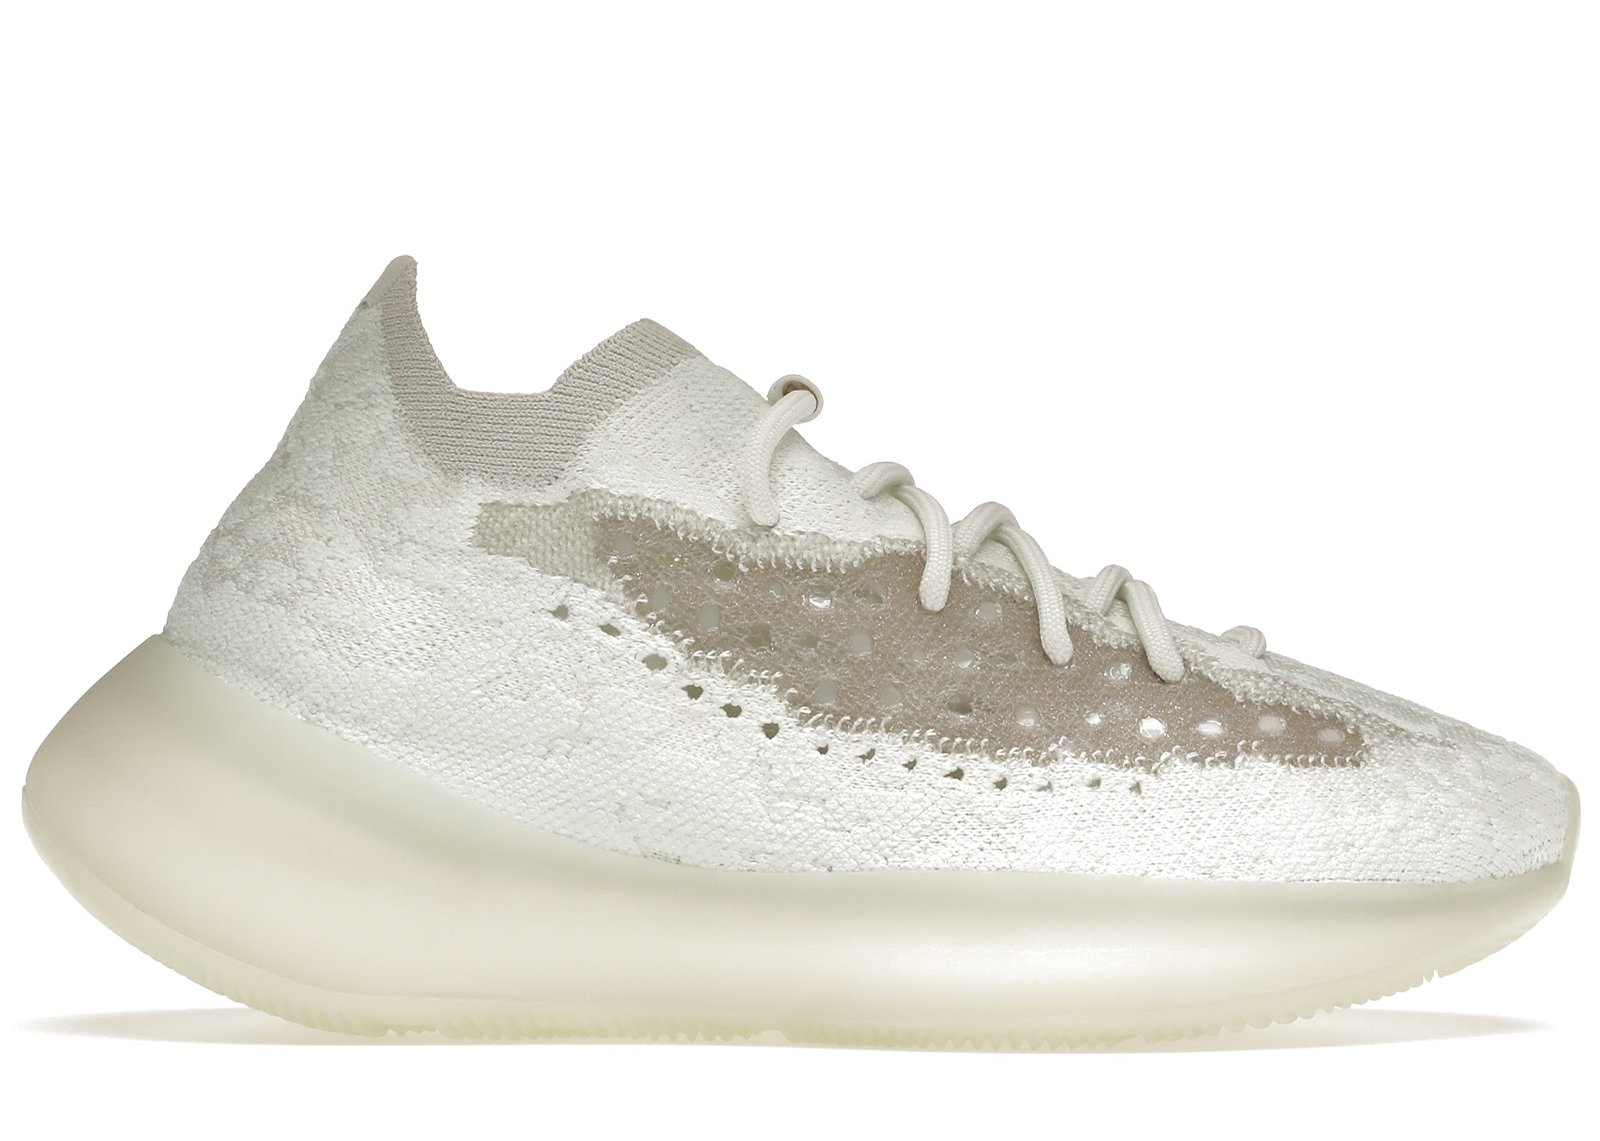 adidas Yeezy Boost 380 Calcite Glow sneakers